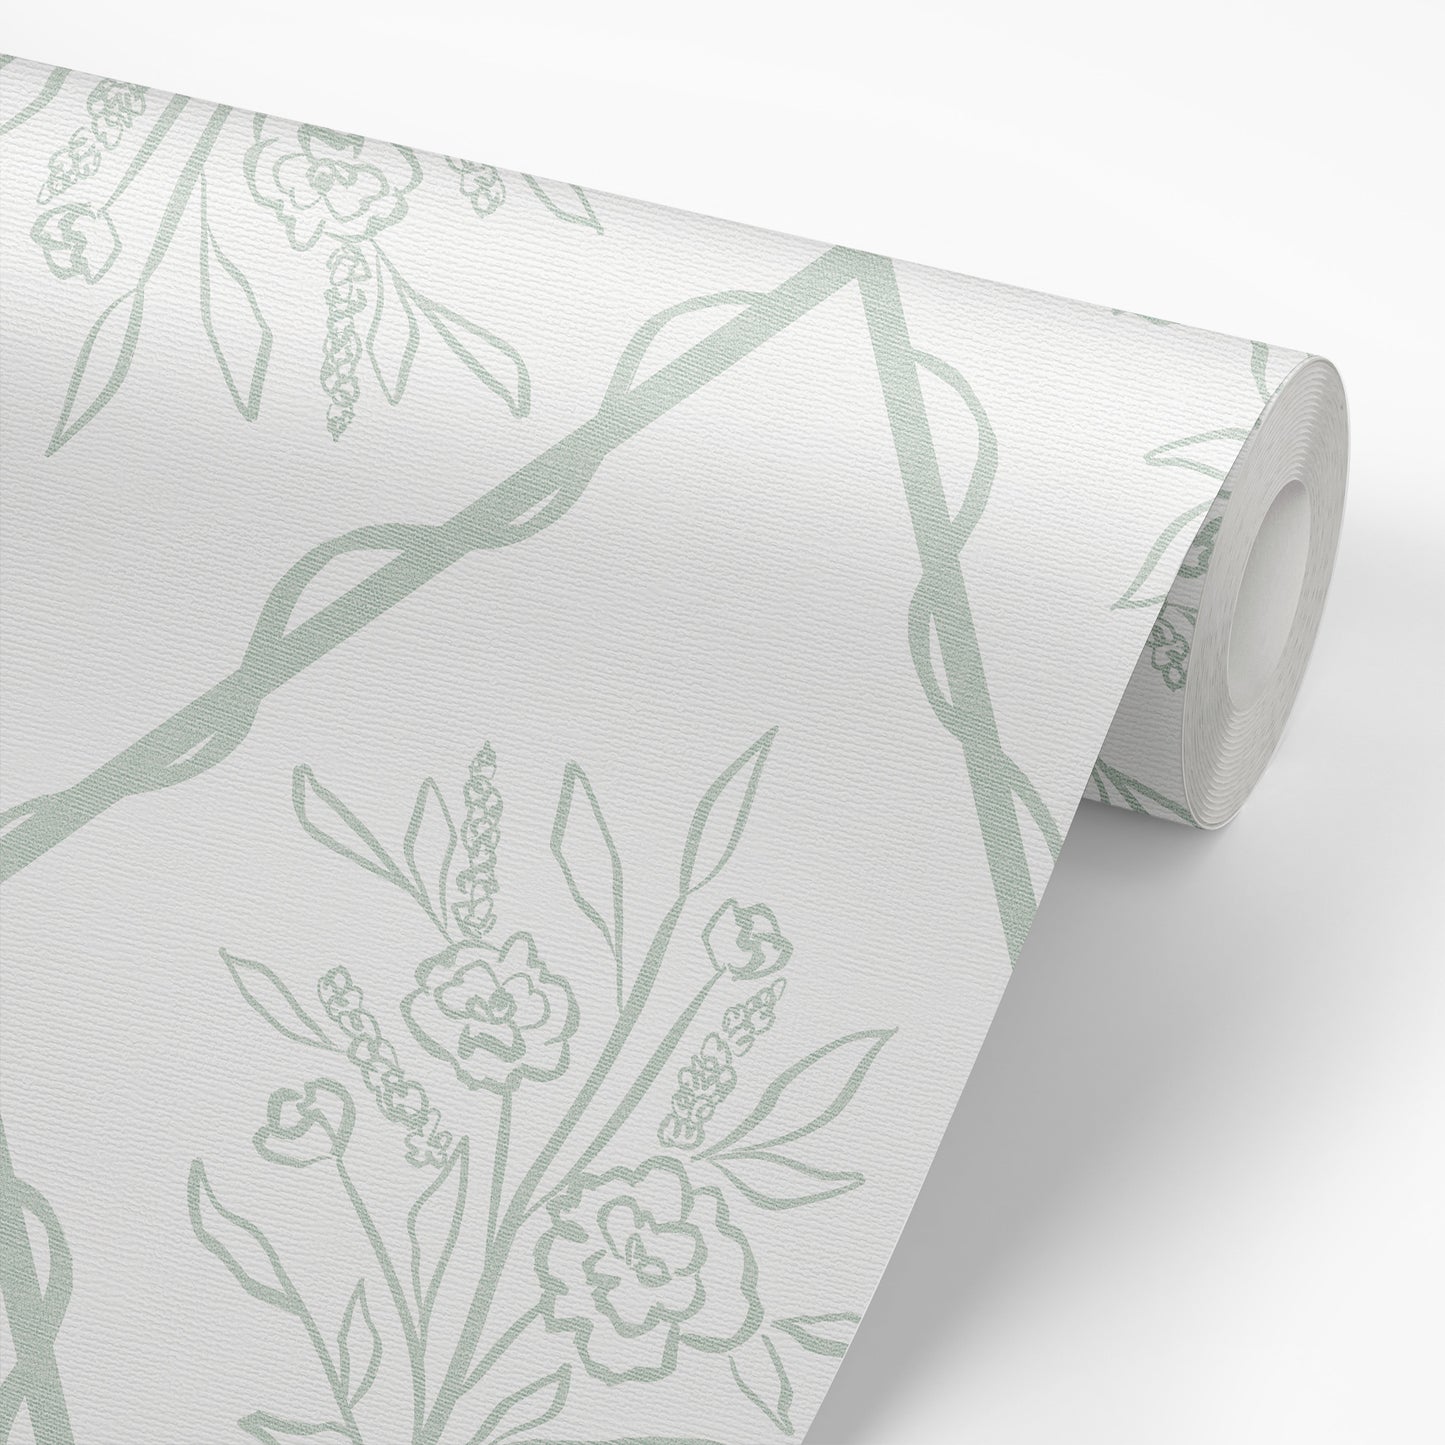 Wallpaper panel featuring Jessica's Floral Trellis Wallpaper- a classic floral pattern